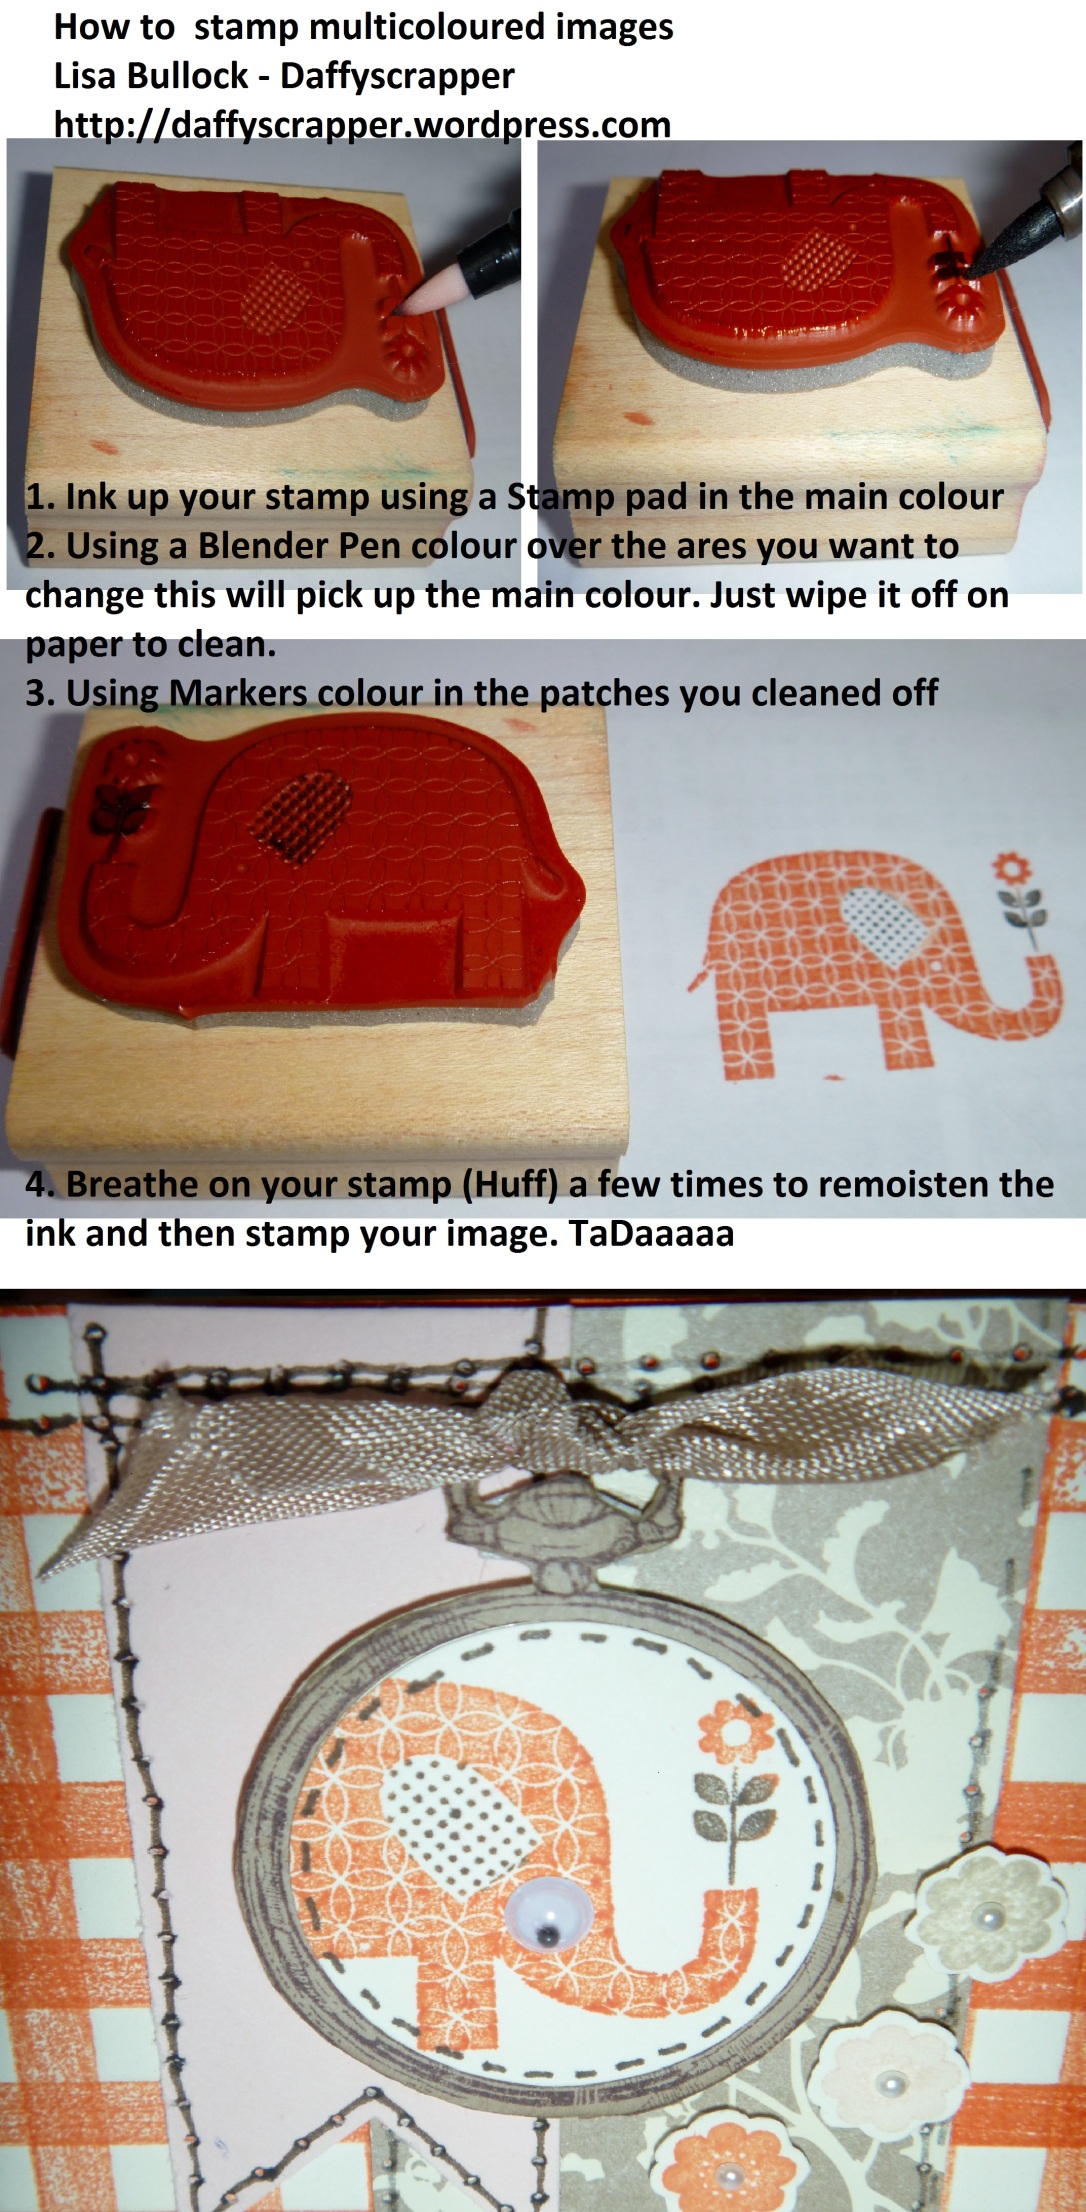 How to stamp mulicoloured images